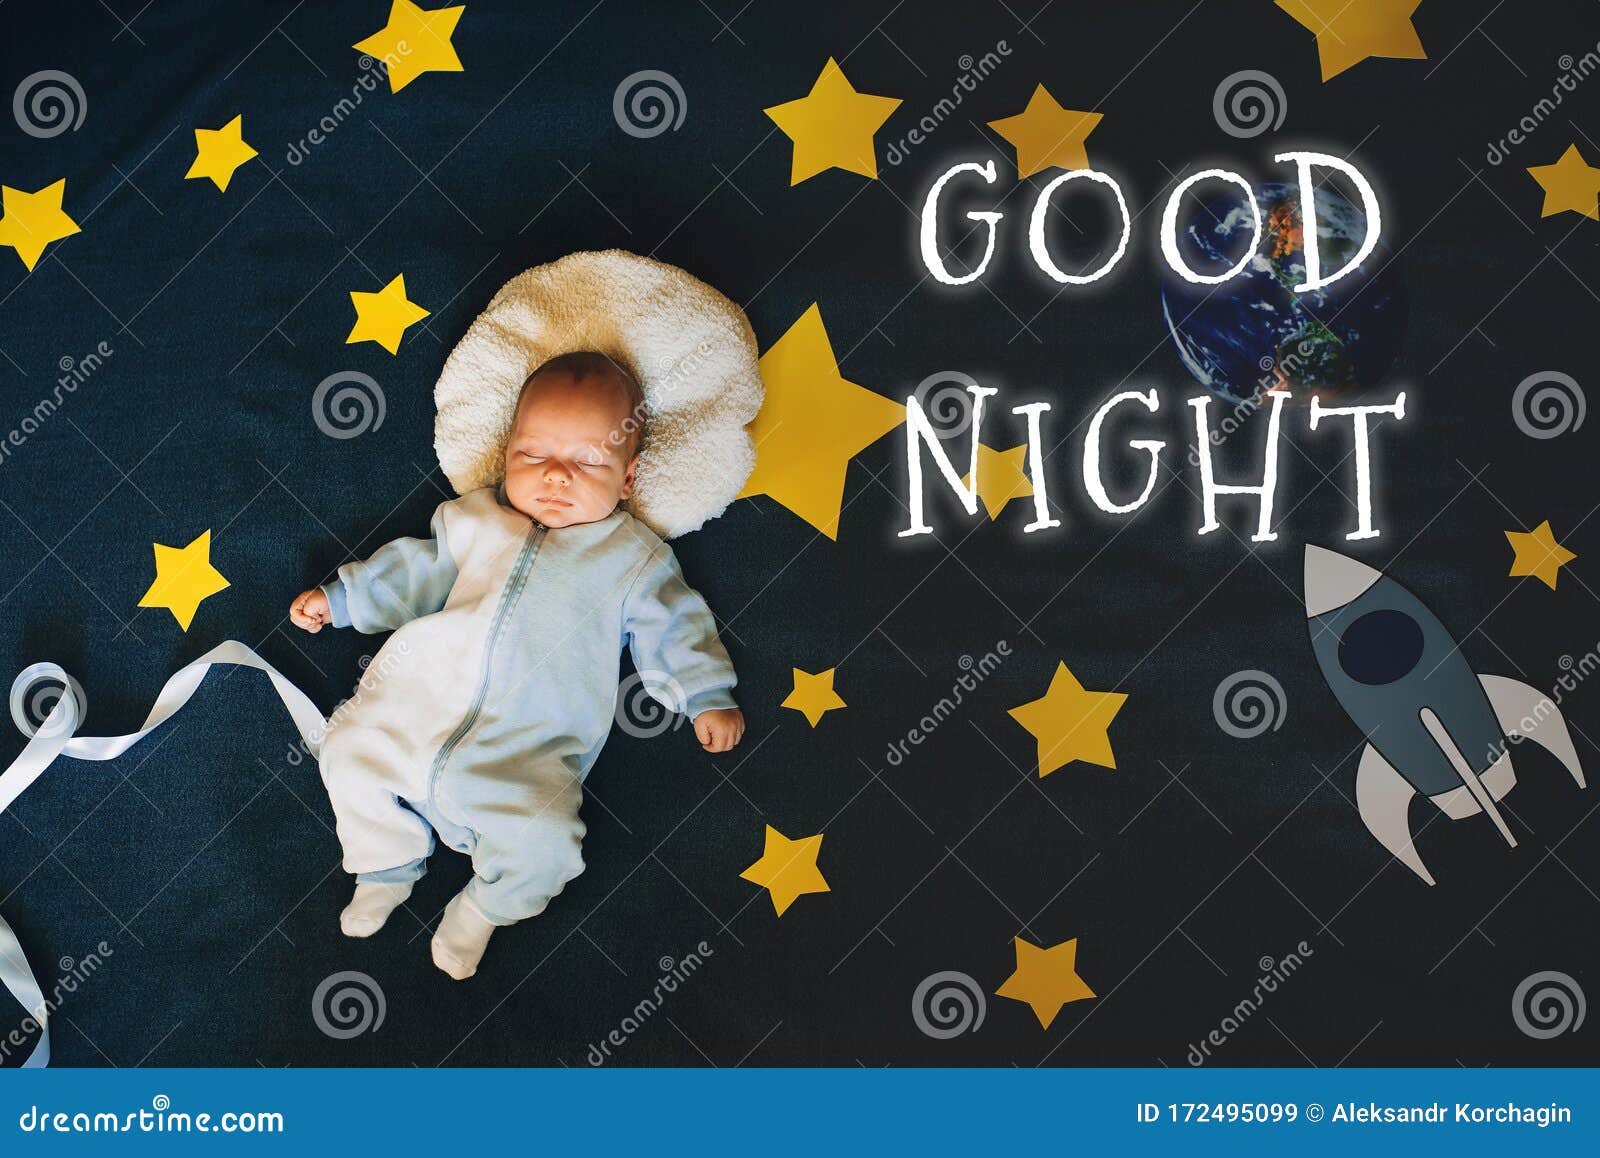 Greeting Card with the Inscription Good Night. Little Boy Baby ...